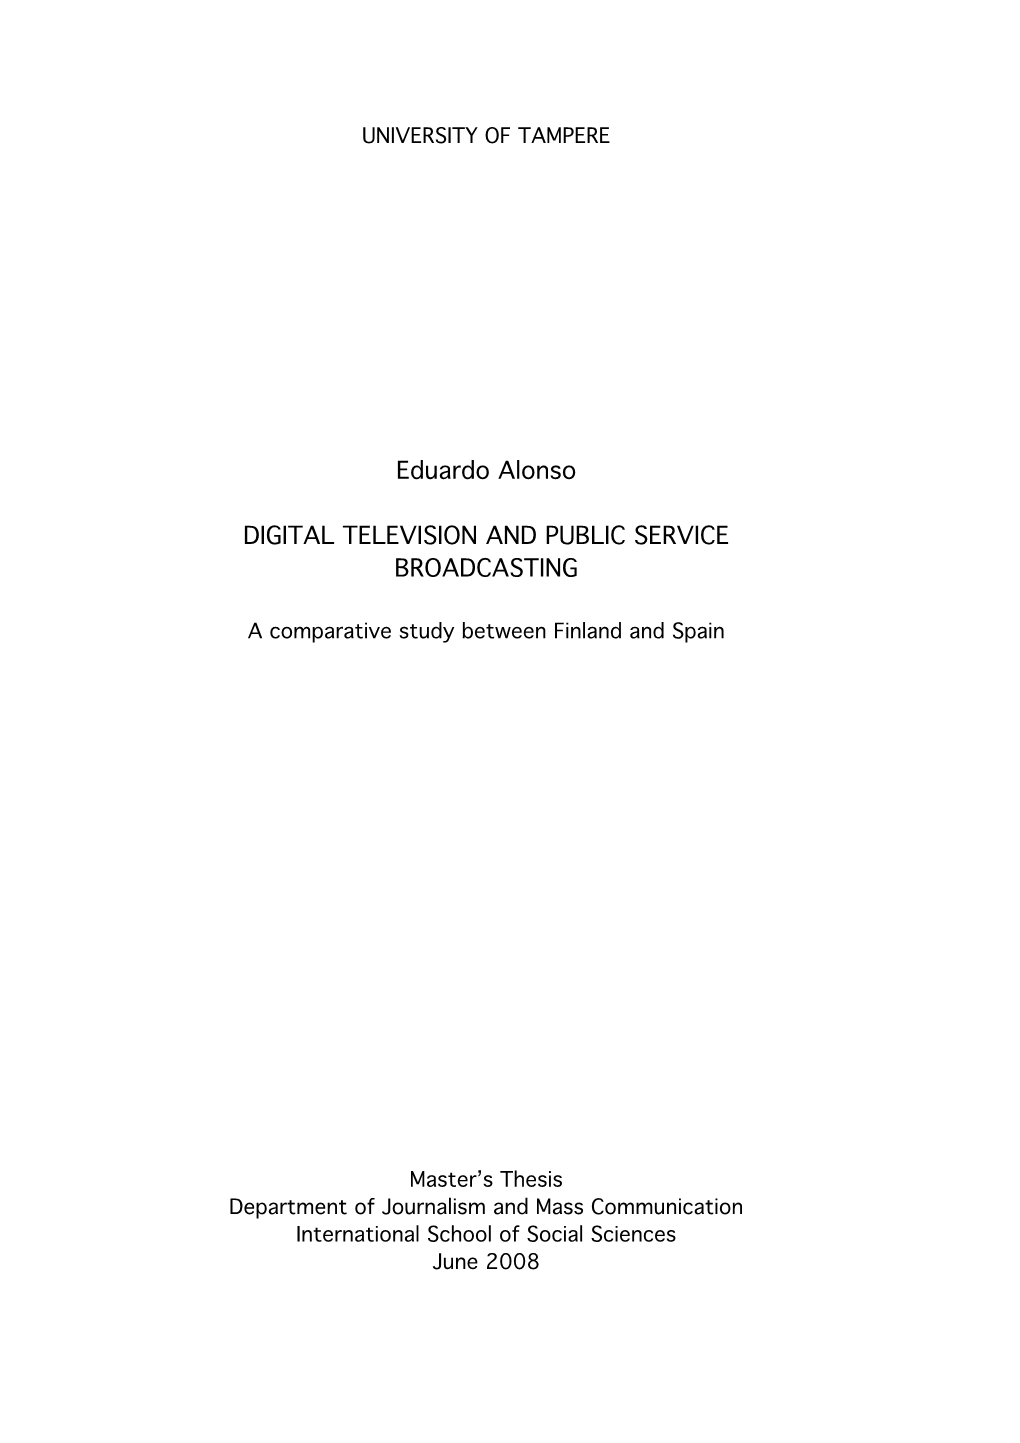 Digital Television and Public Service Broadcasting